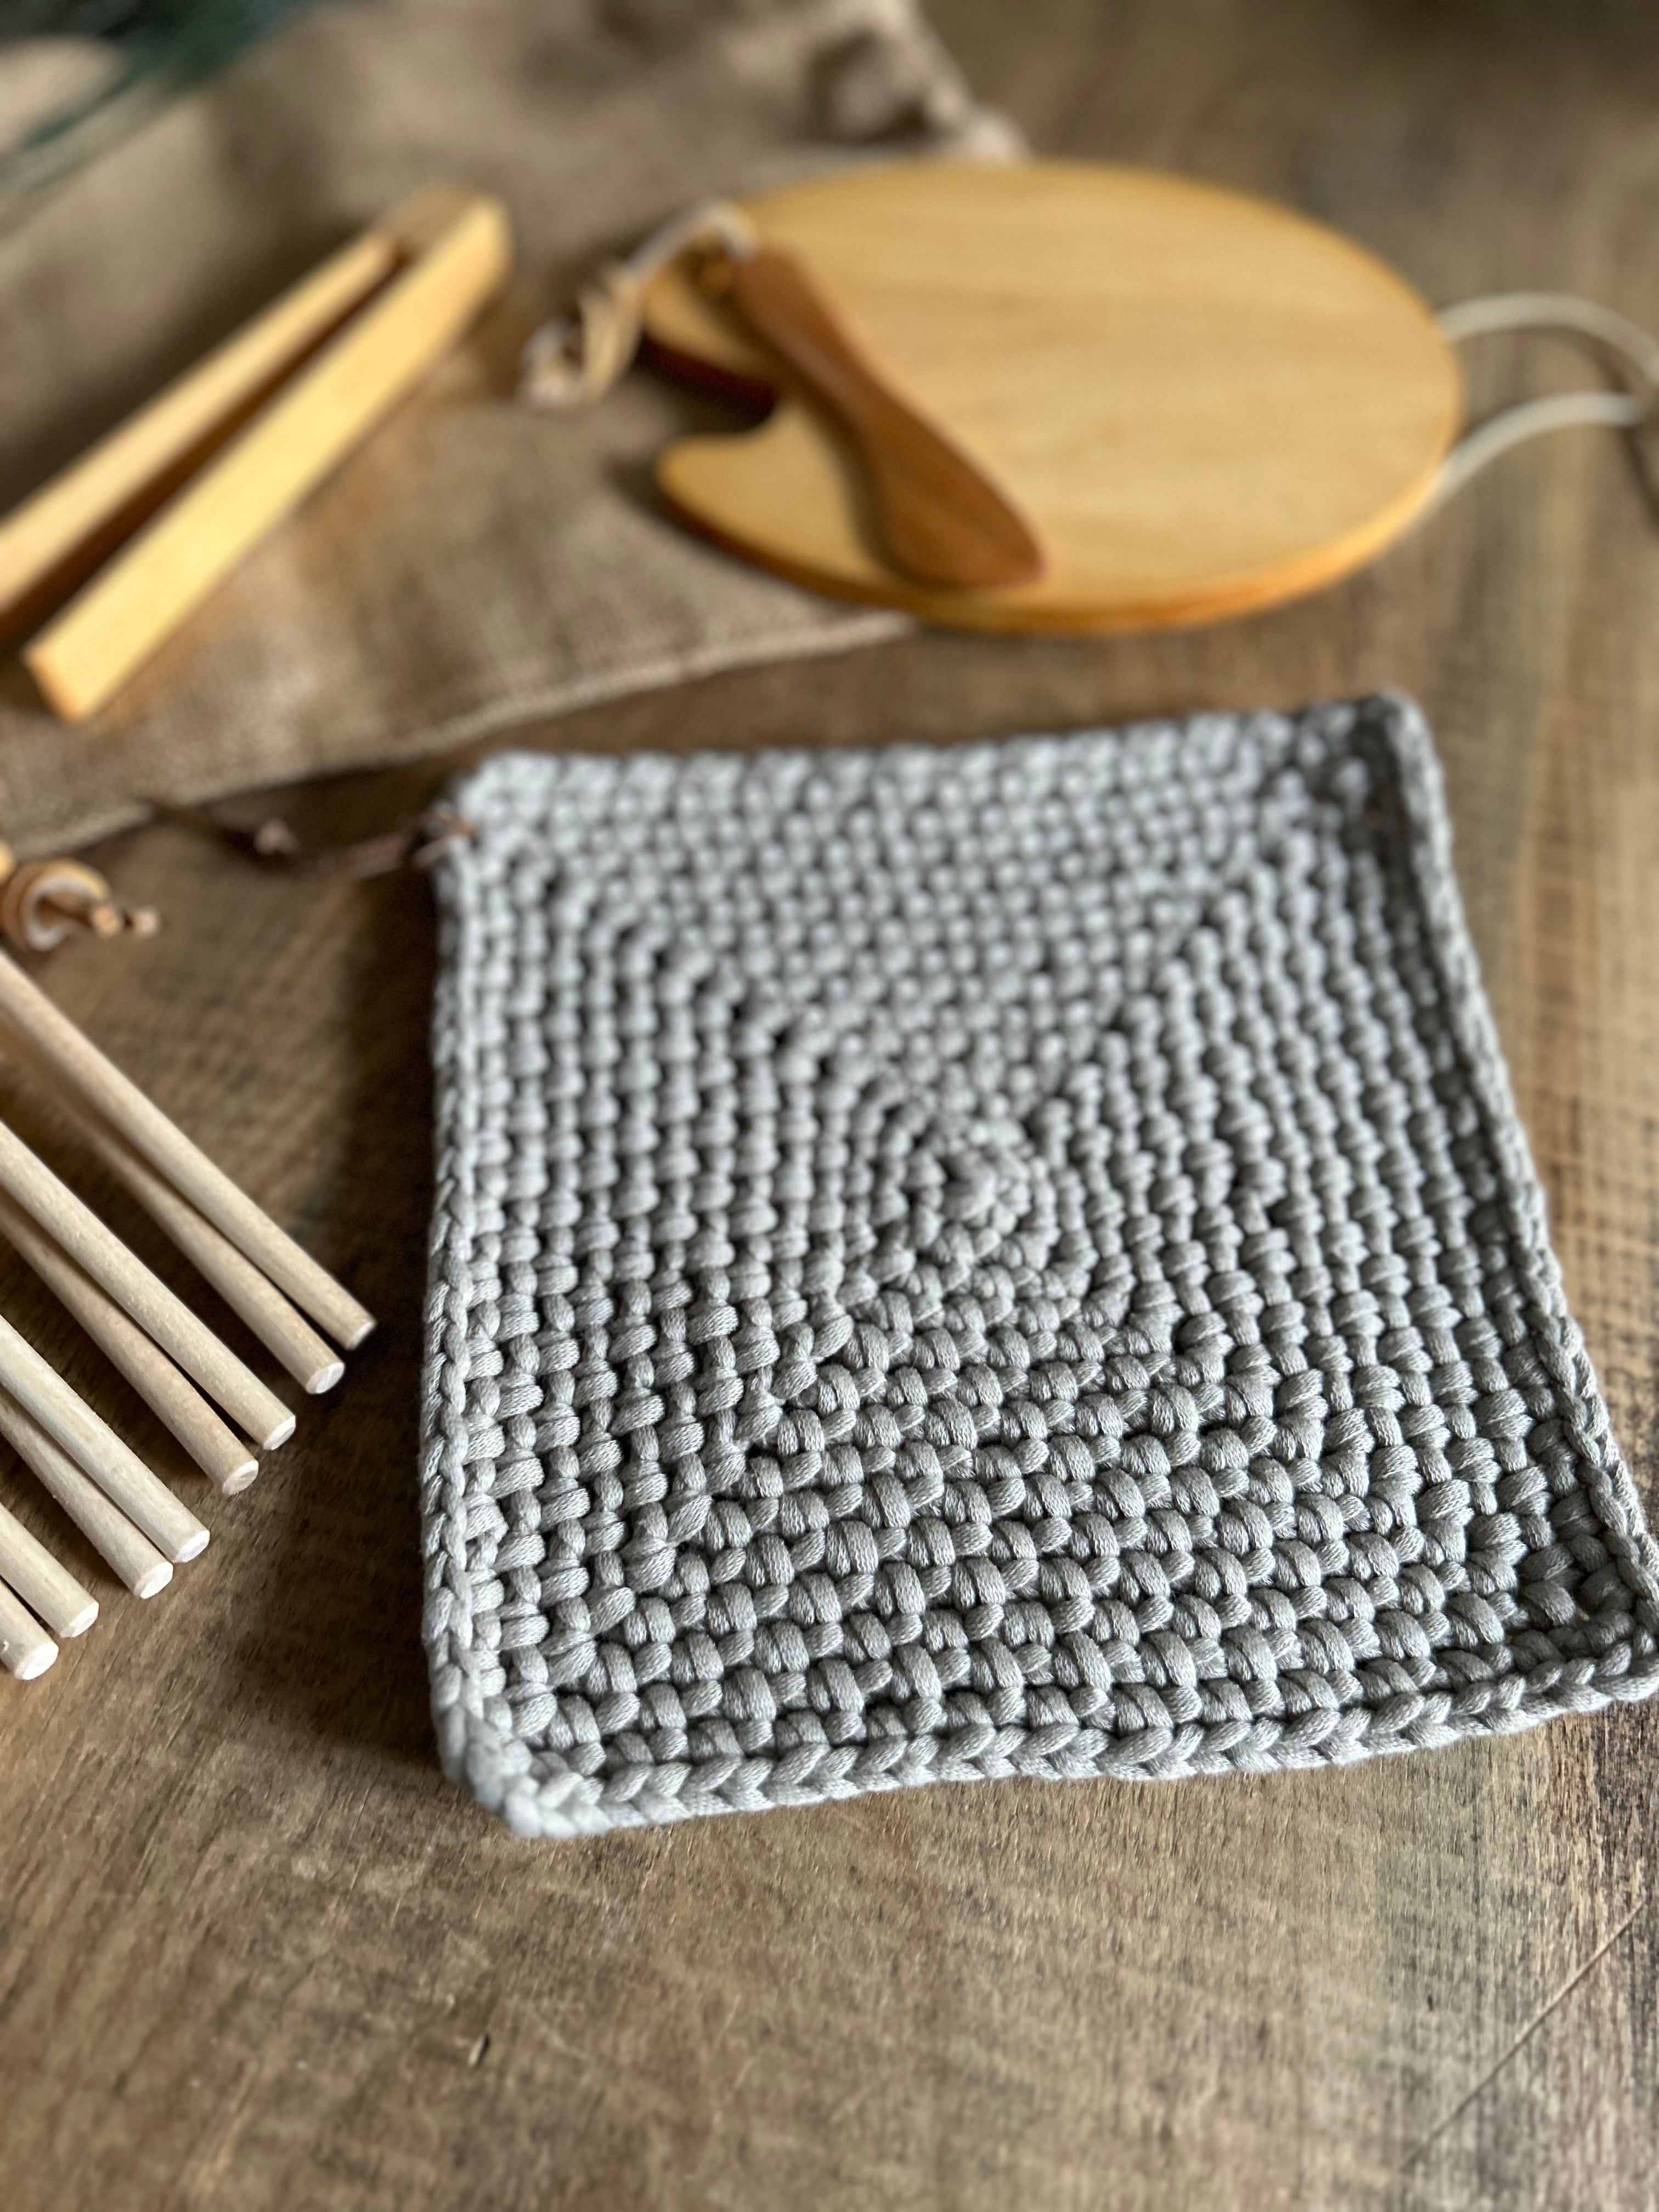 Crochet Trivet Hot Pad With Leather Loop Tie Clay